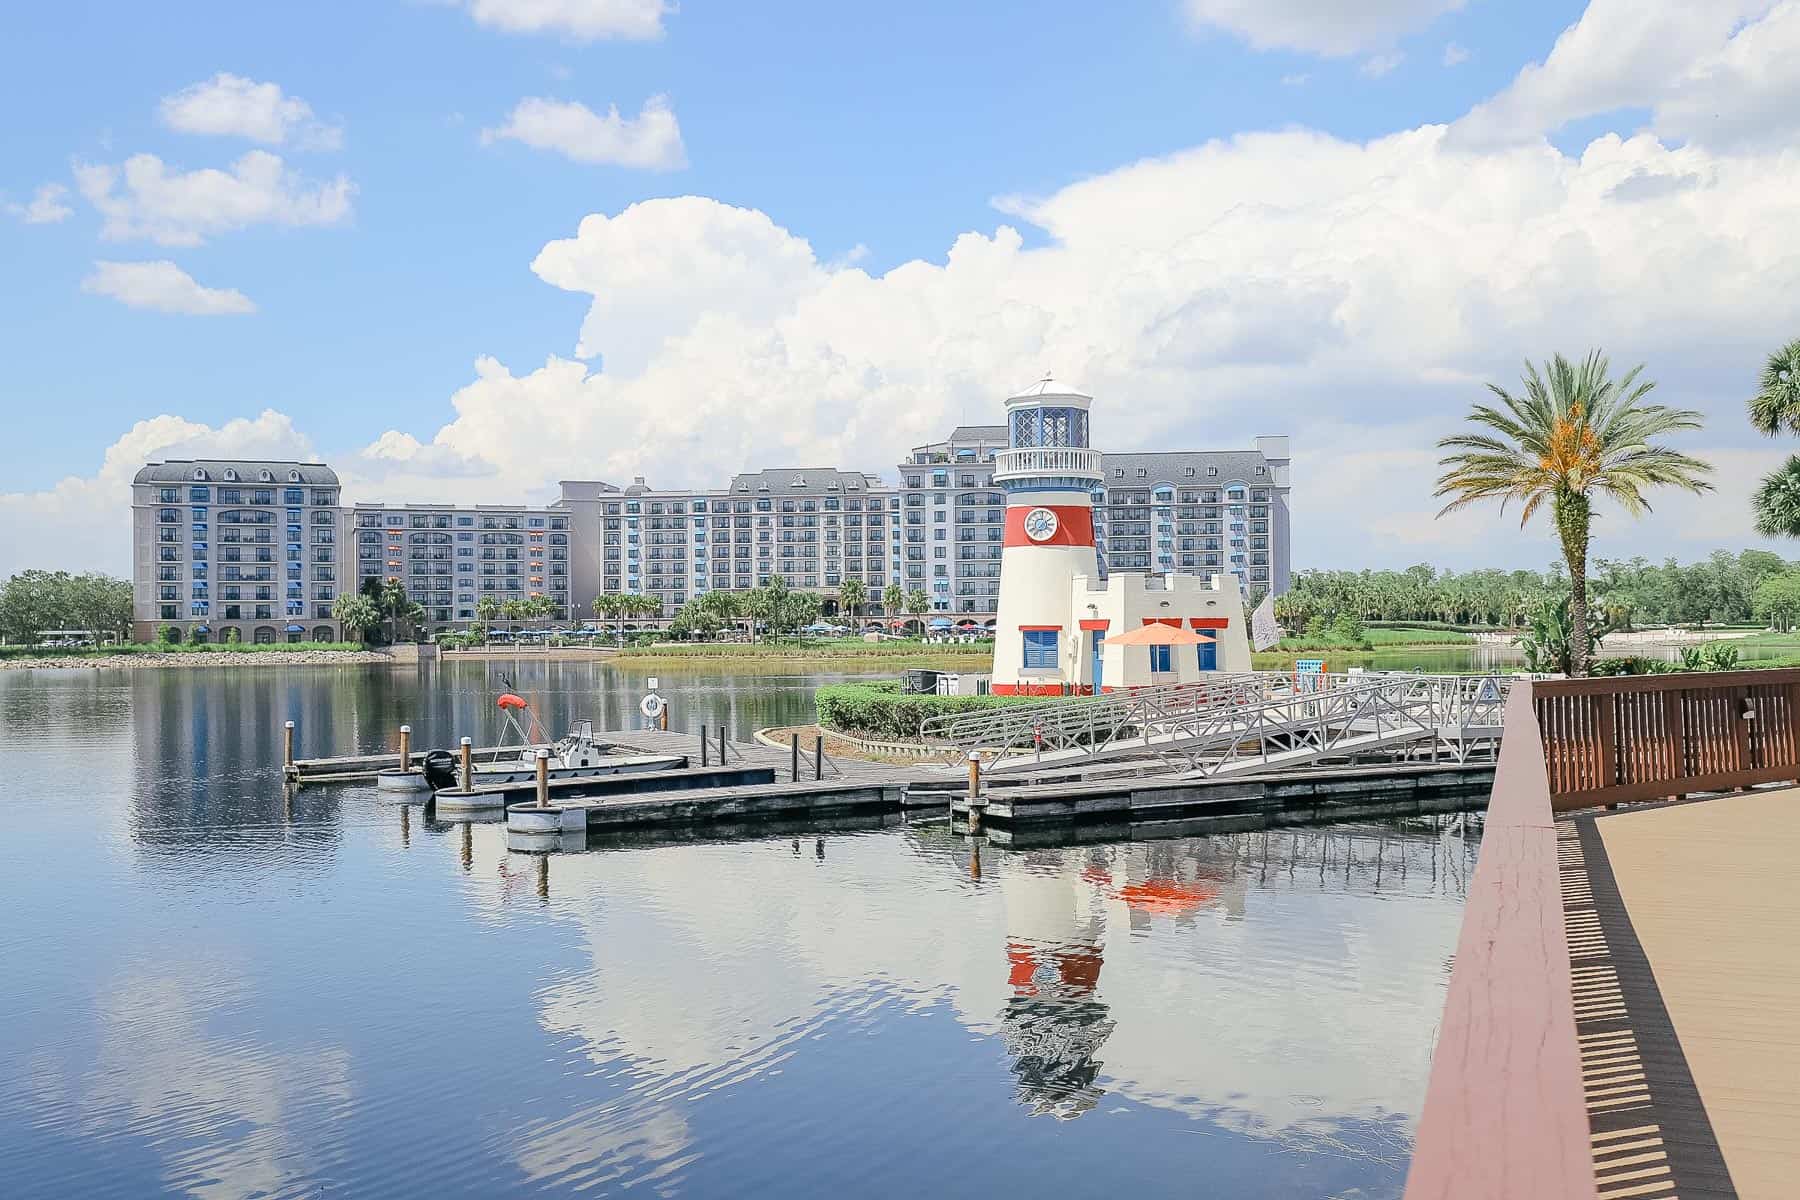 Disney's Riviera as seen from Caribbean Beach with the lighthouse